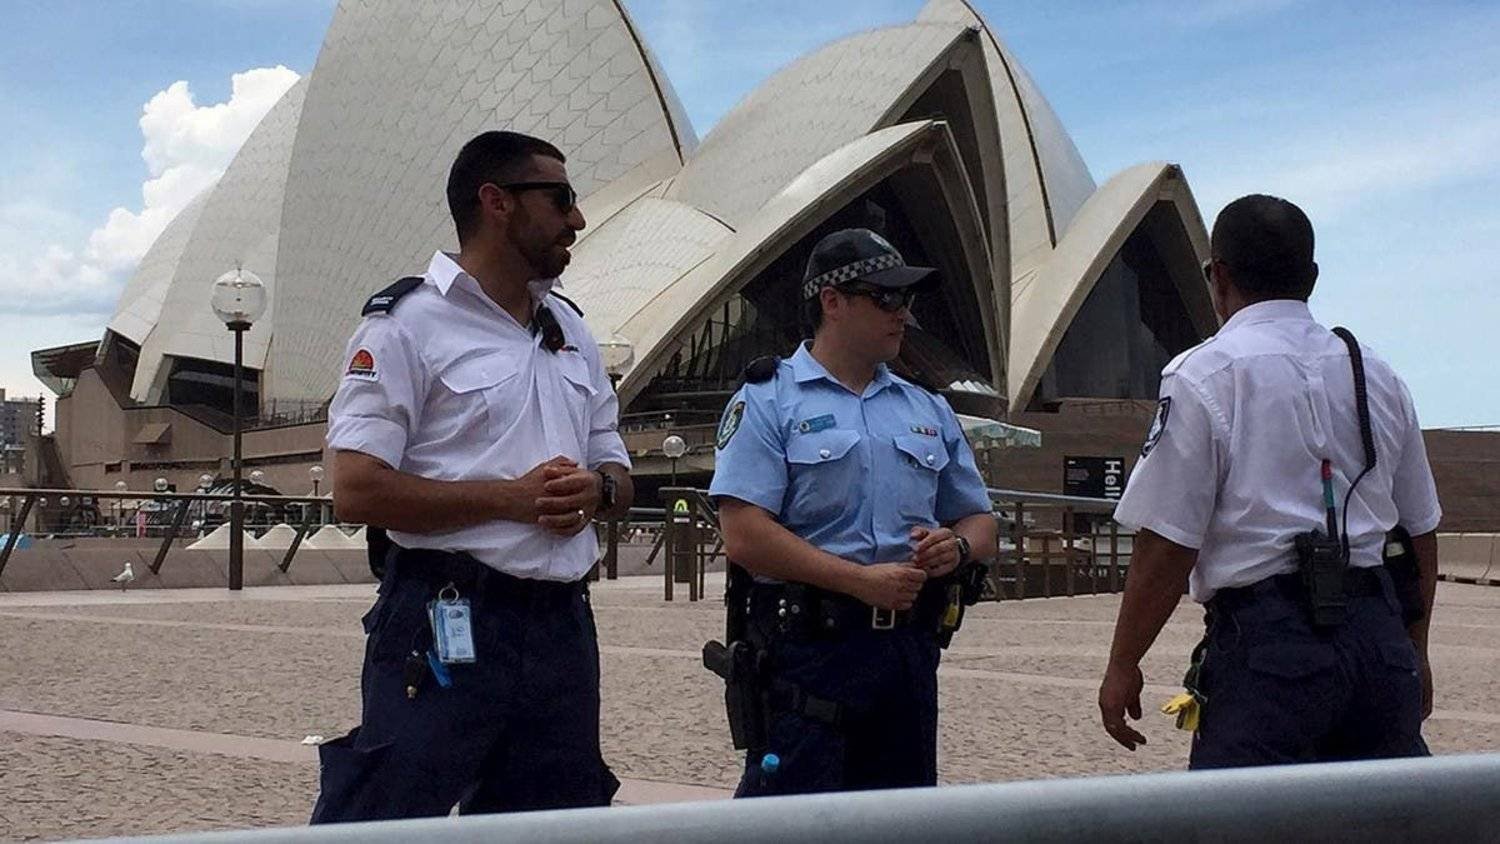 Police and security staff stand in front of the Sydney Opera House on January 14, 2016. (File photo: Reuters)
